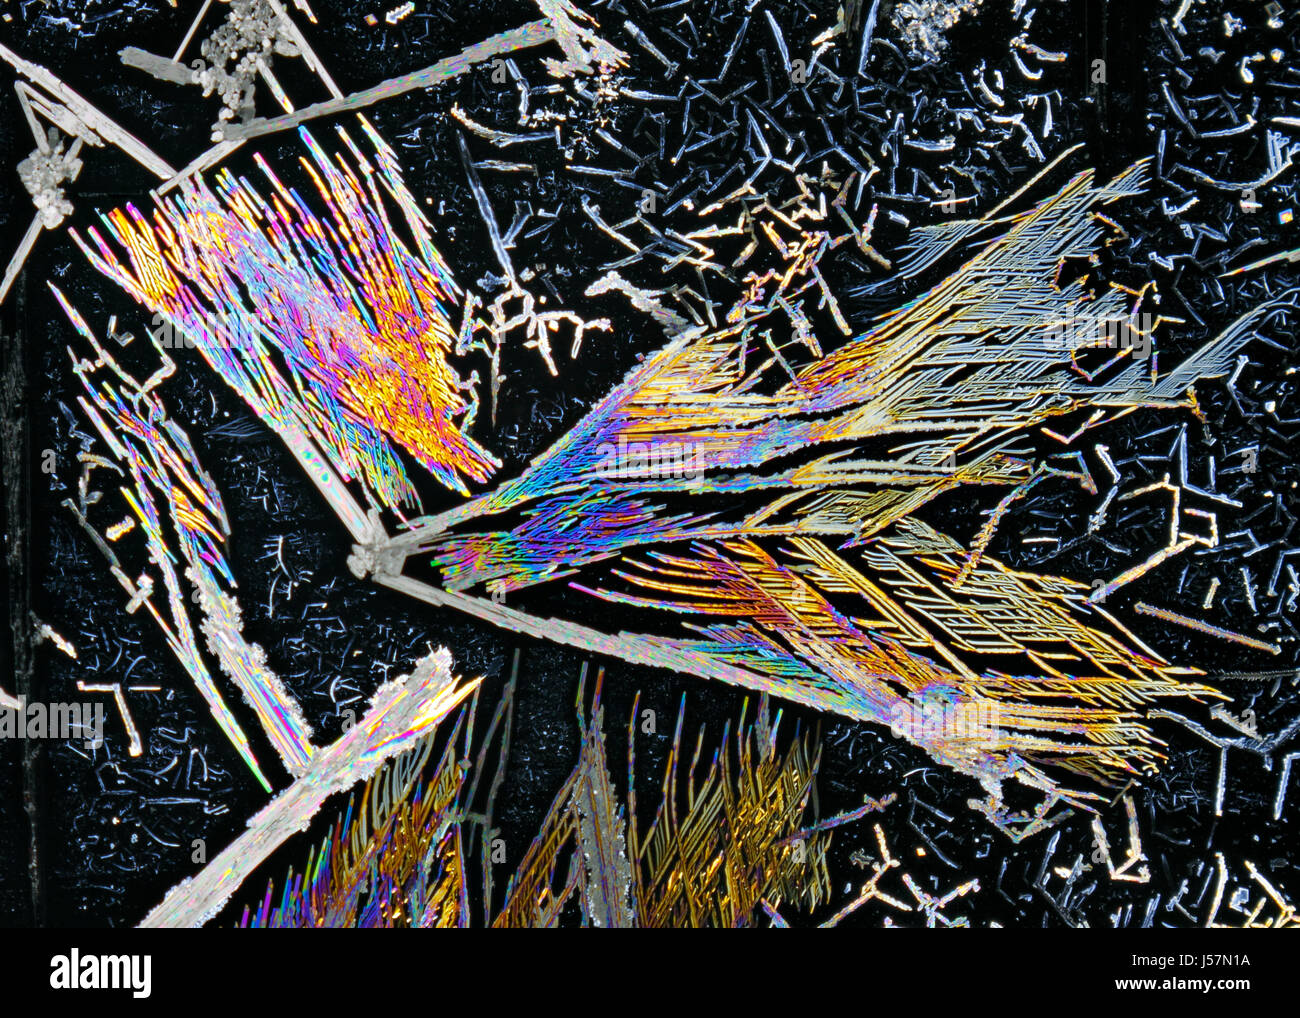 Microscopic view of colorful potassium nitrate crystals. Polarized light, crossed polarizers. Stock Photo